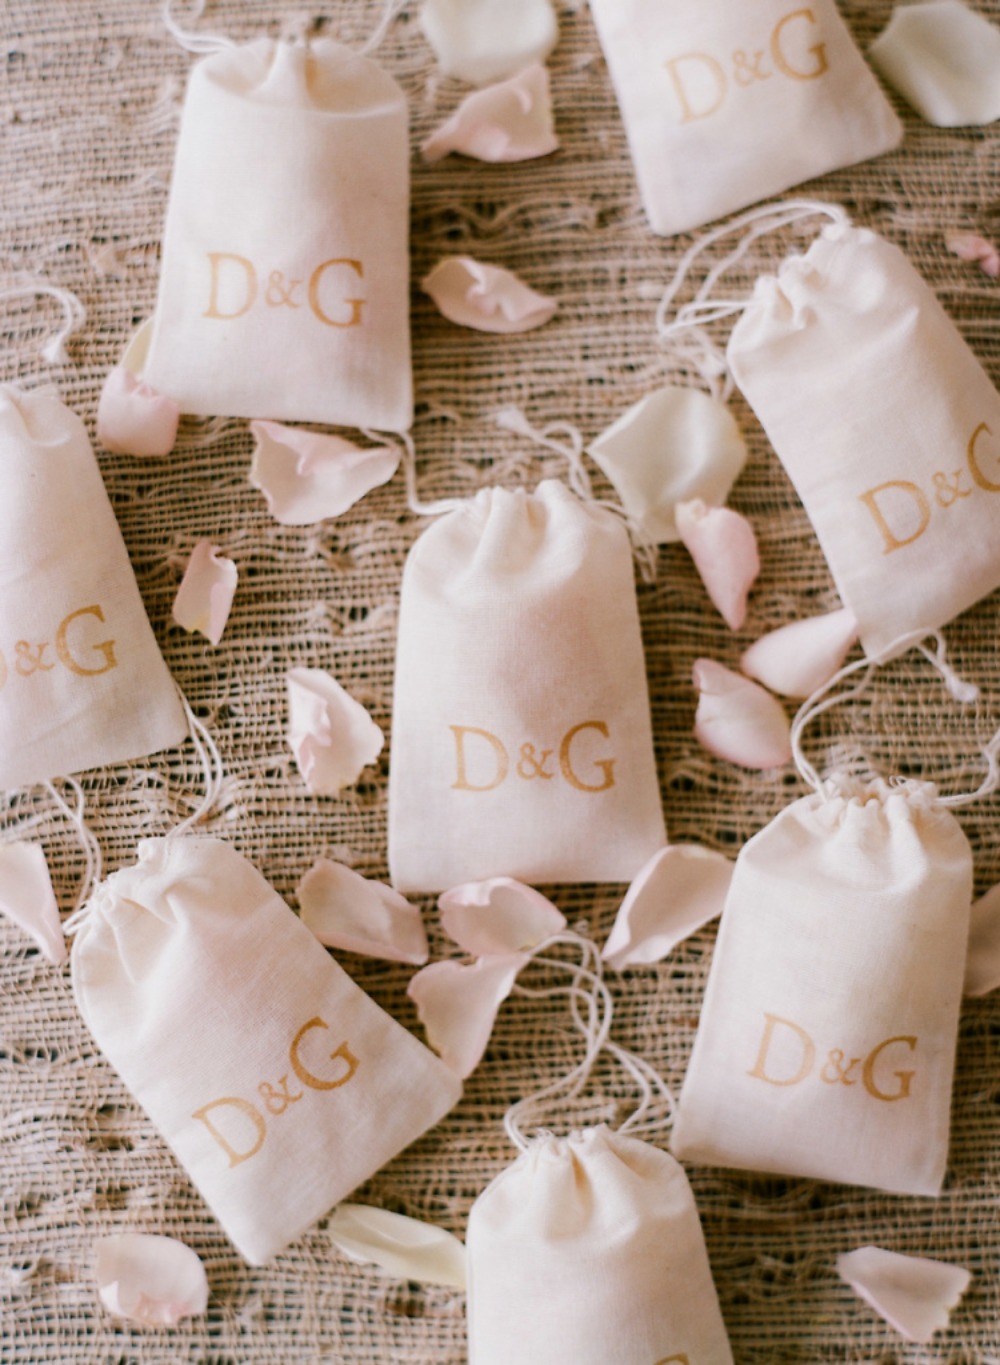 monogrammed bags of confetti for the end of the wedding ceremony